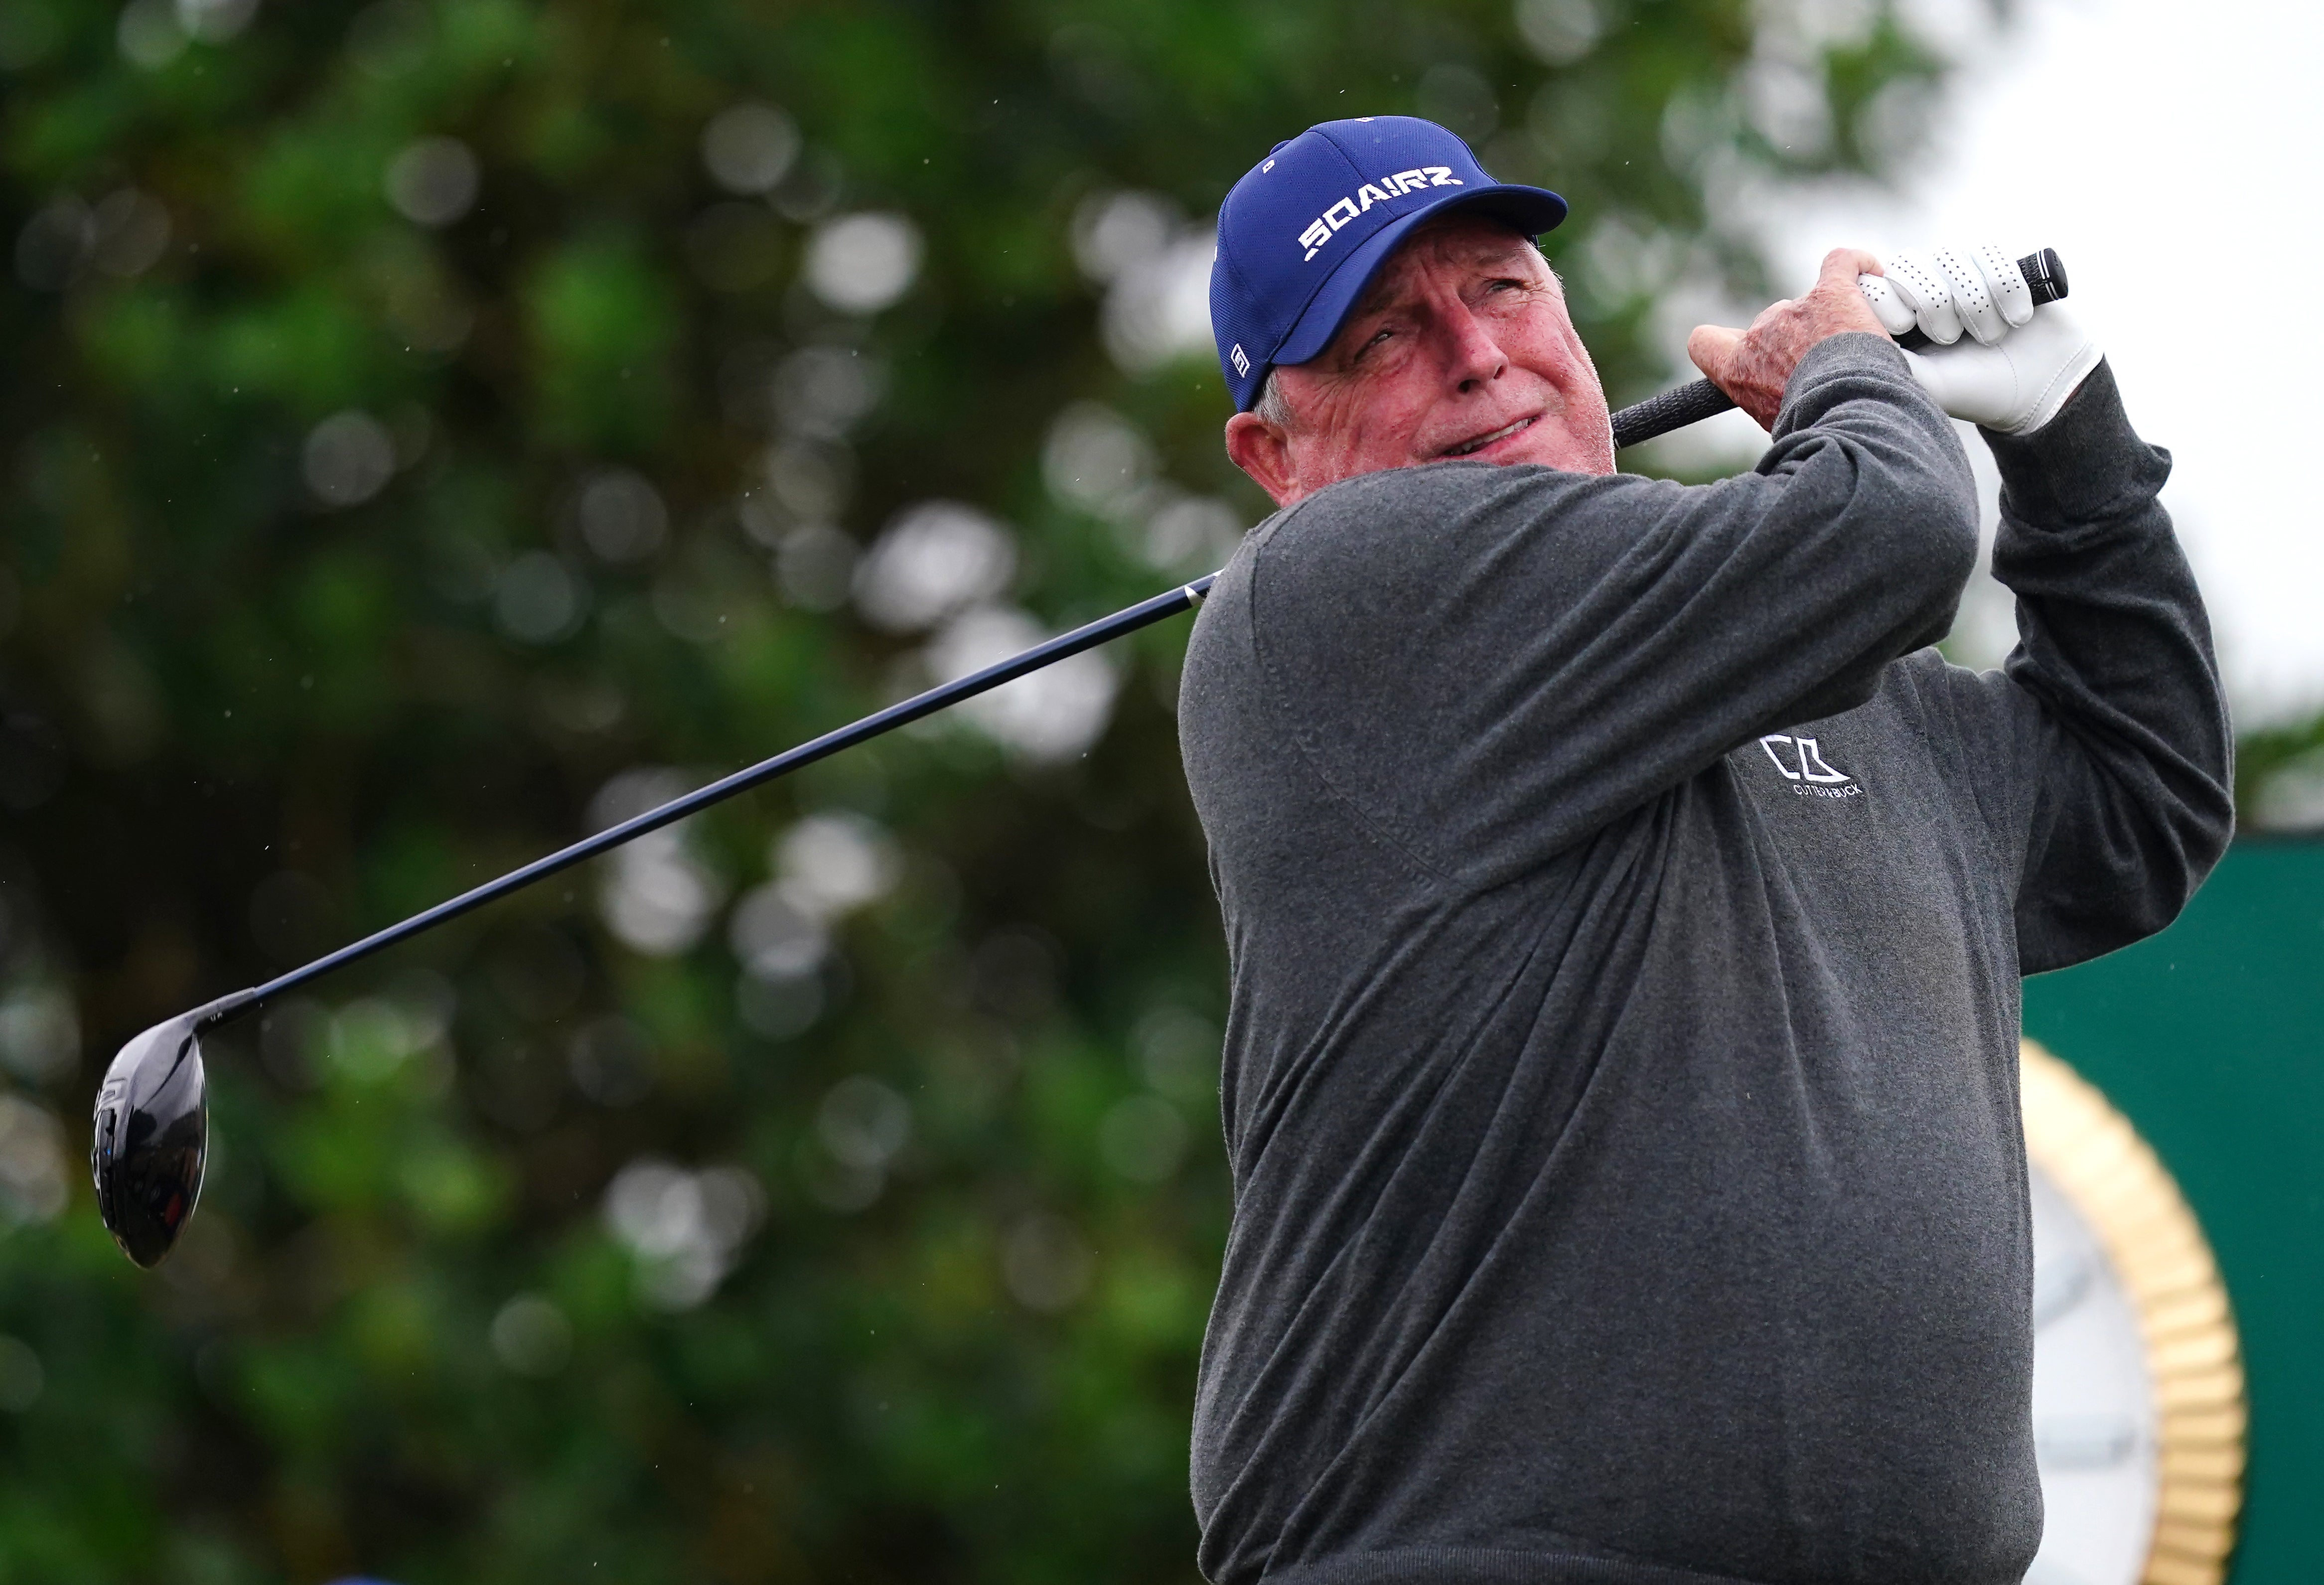 Former winner Mark Calcavecchia was among the early starters on day two of the 150th Open (David Davies/PA)